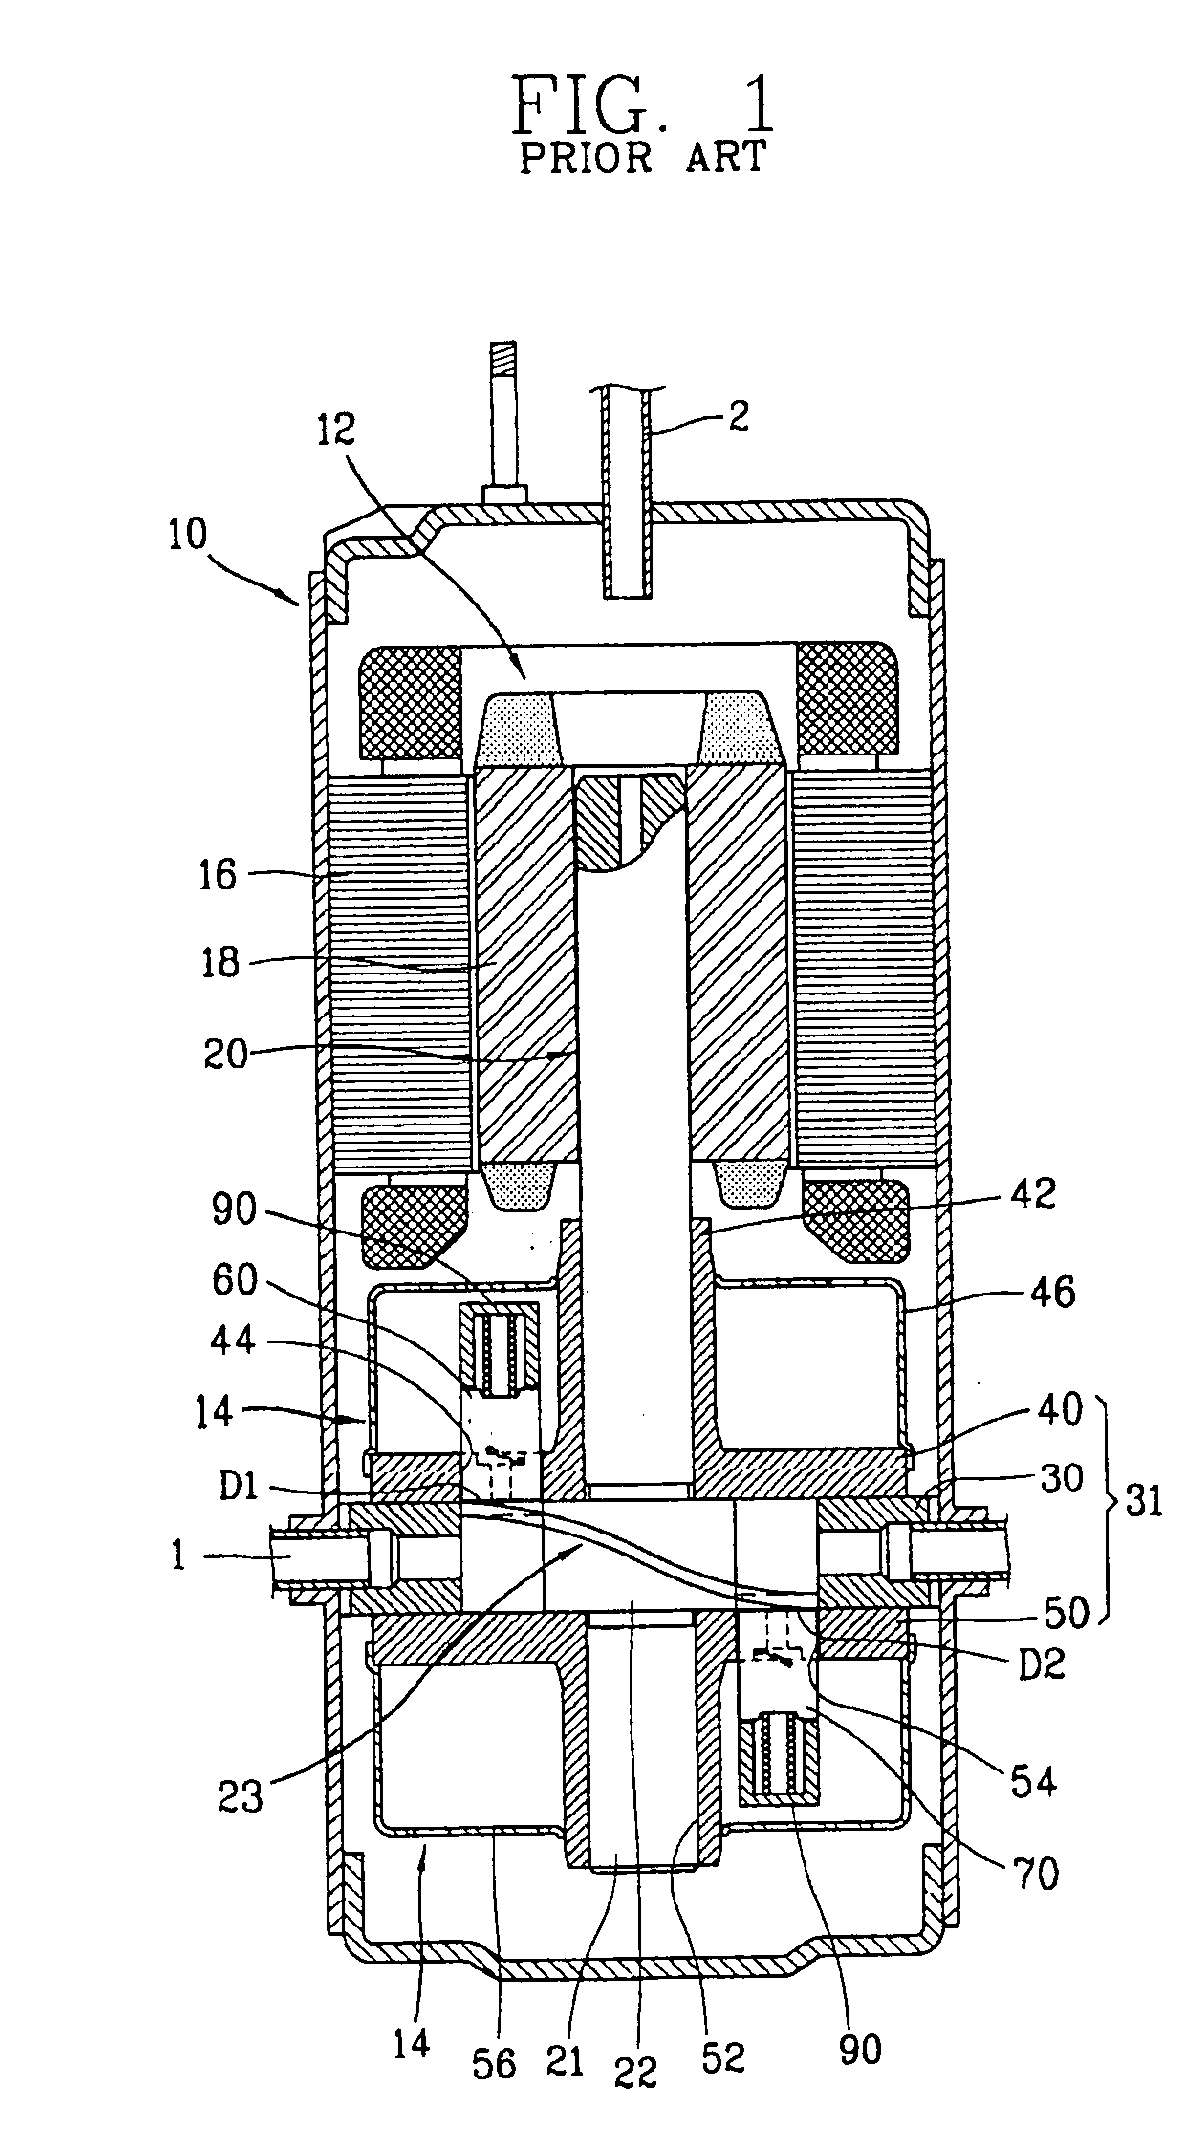 Compressor within motor rotor